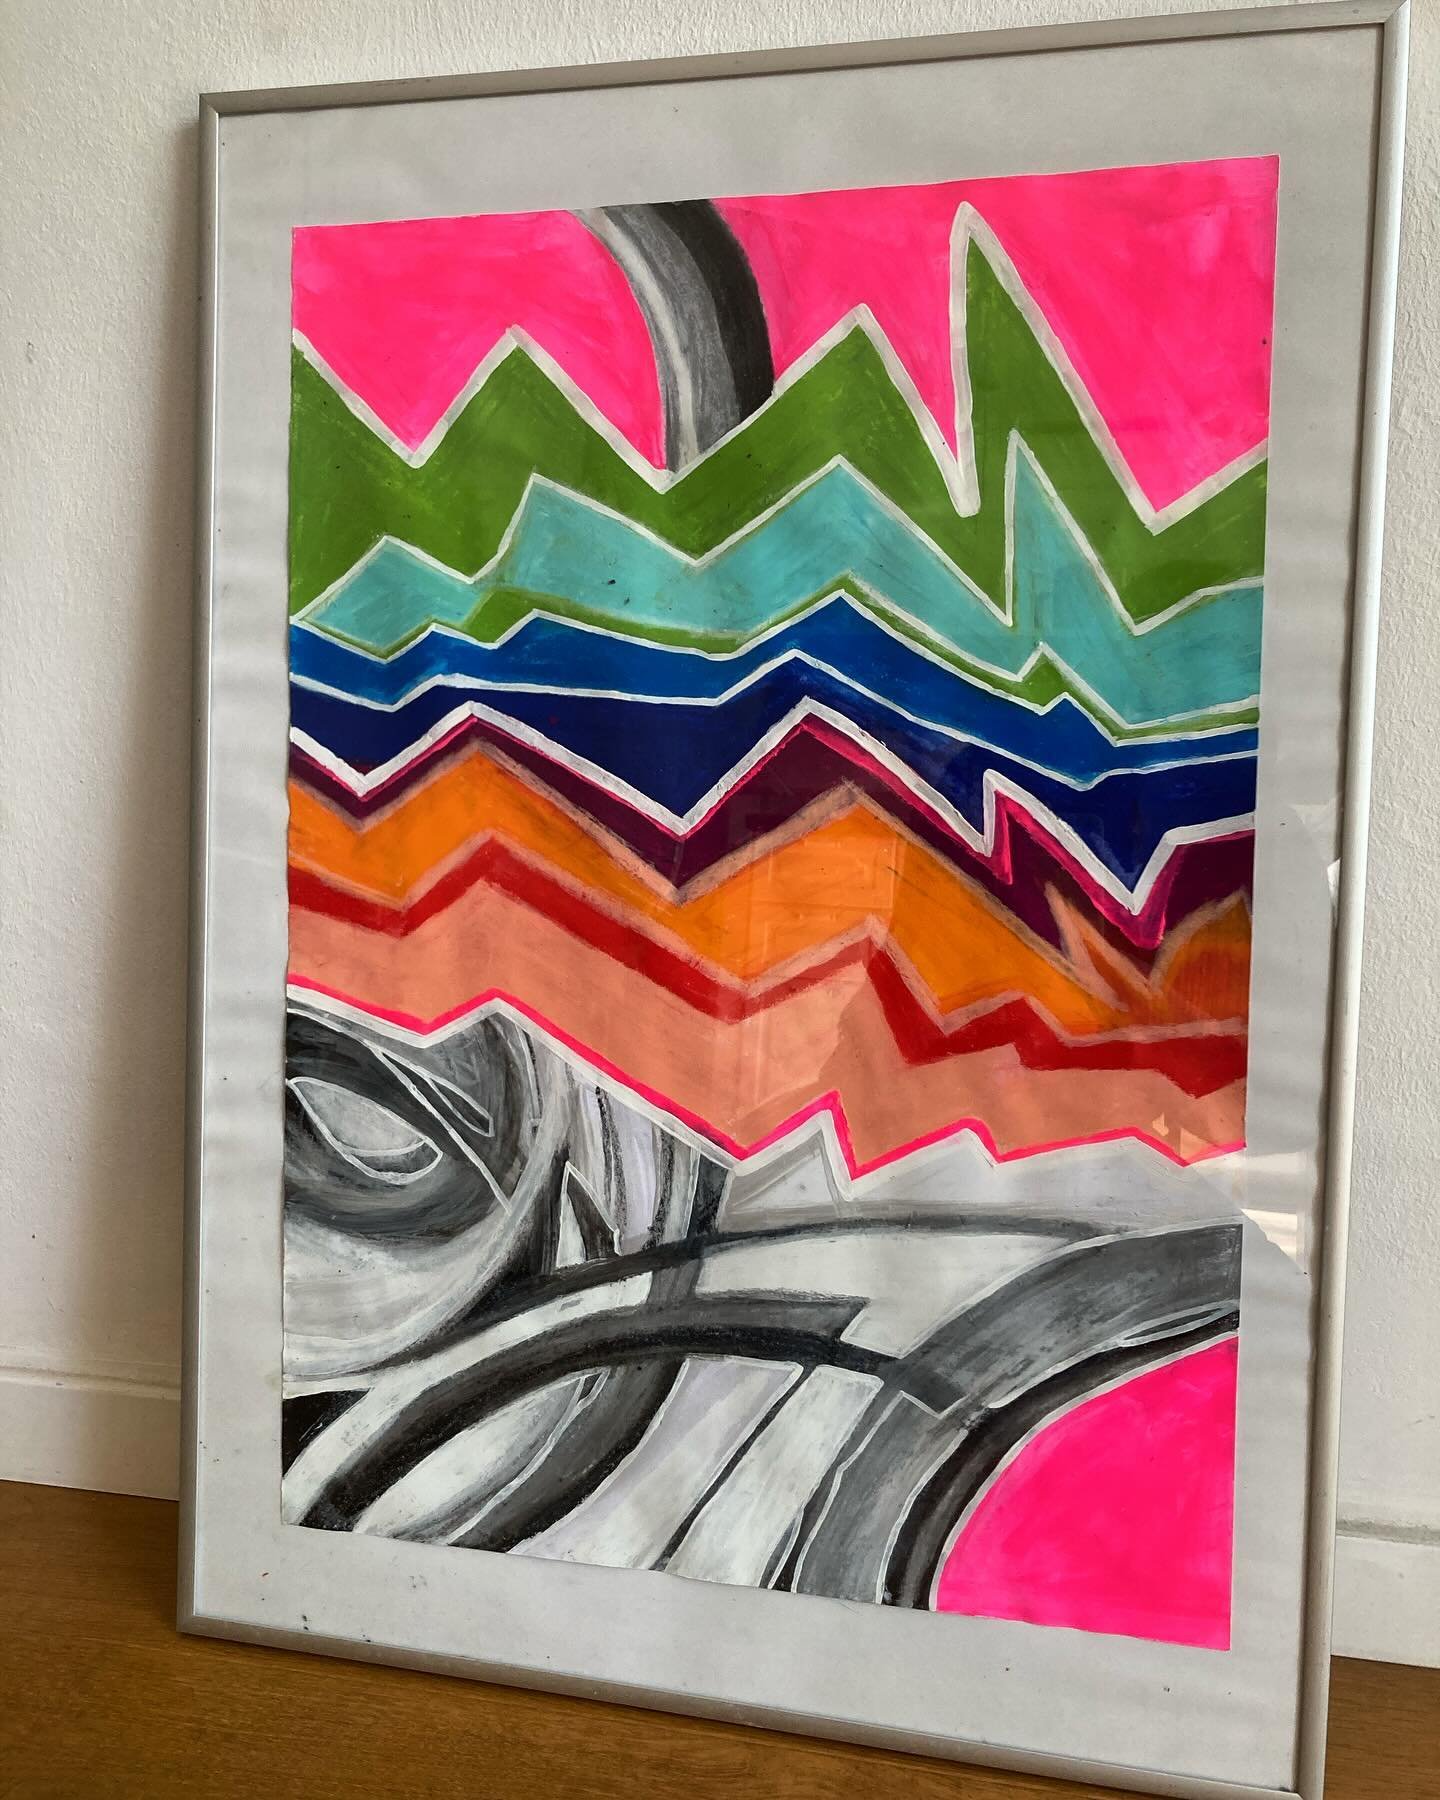 #abstractart #pinklandscape #gallery #acrylicartwork #paintings #art #paint